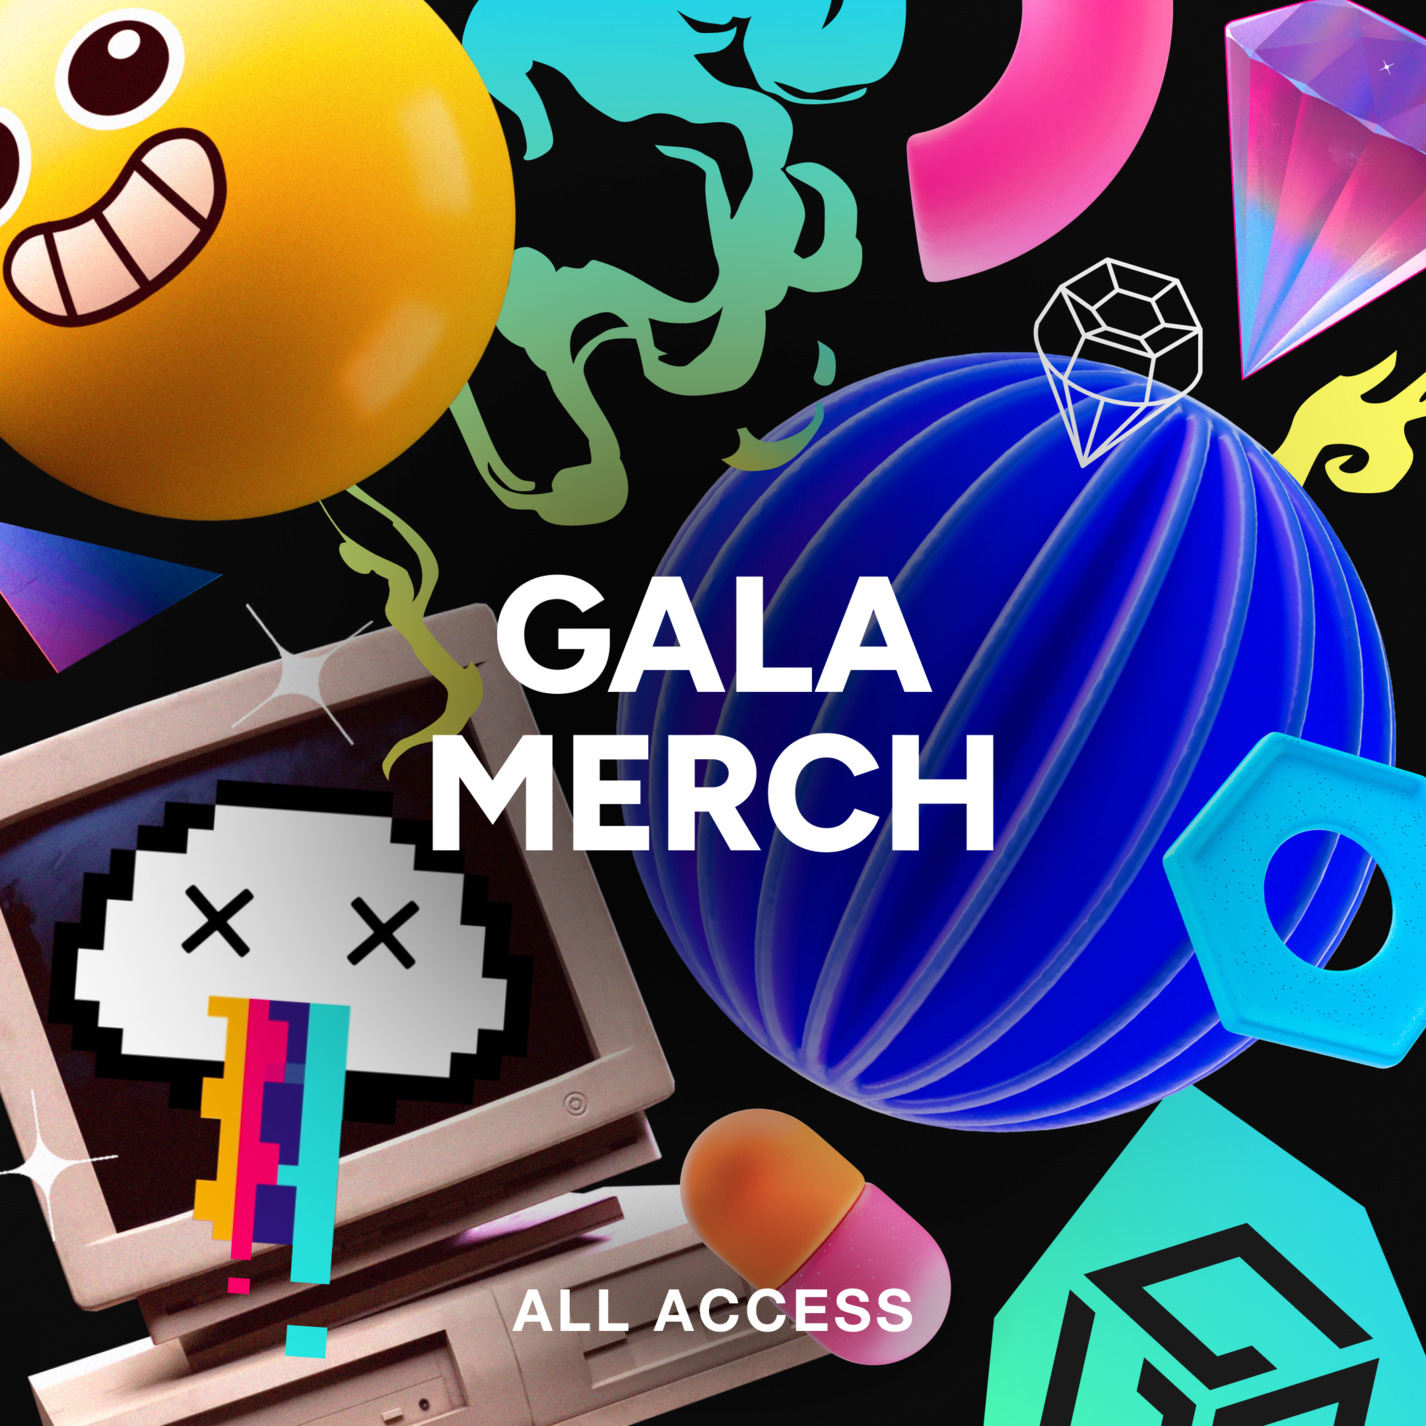 Gala Merch is now available in the Gala Music All Access Store